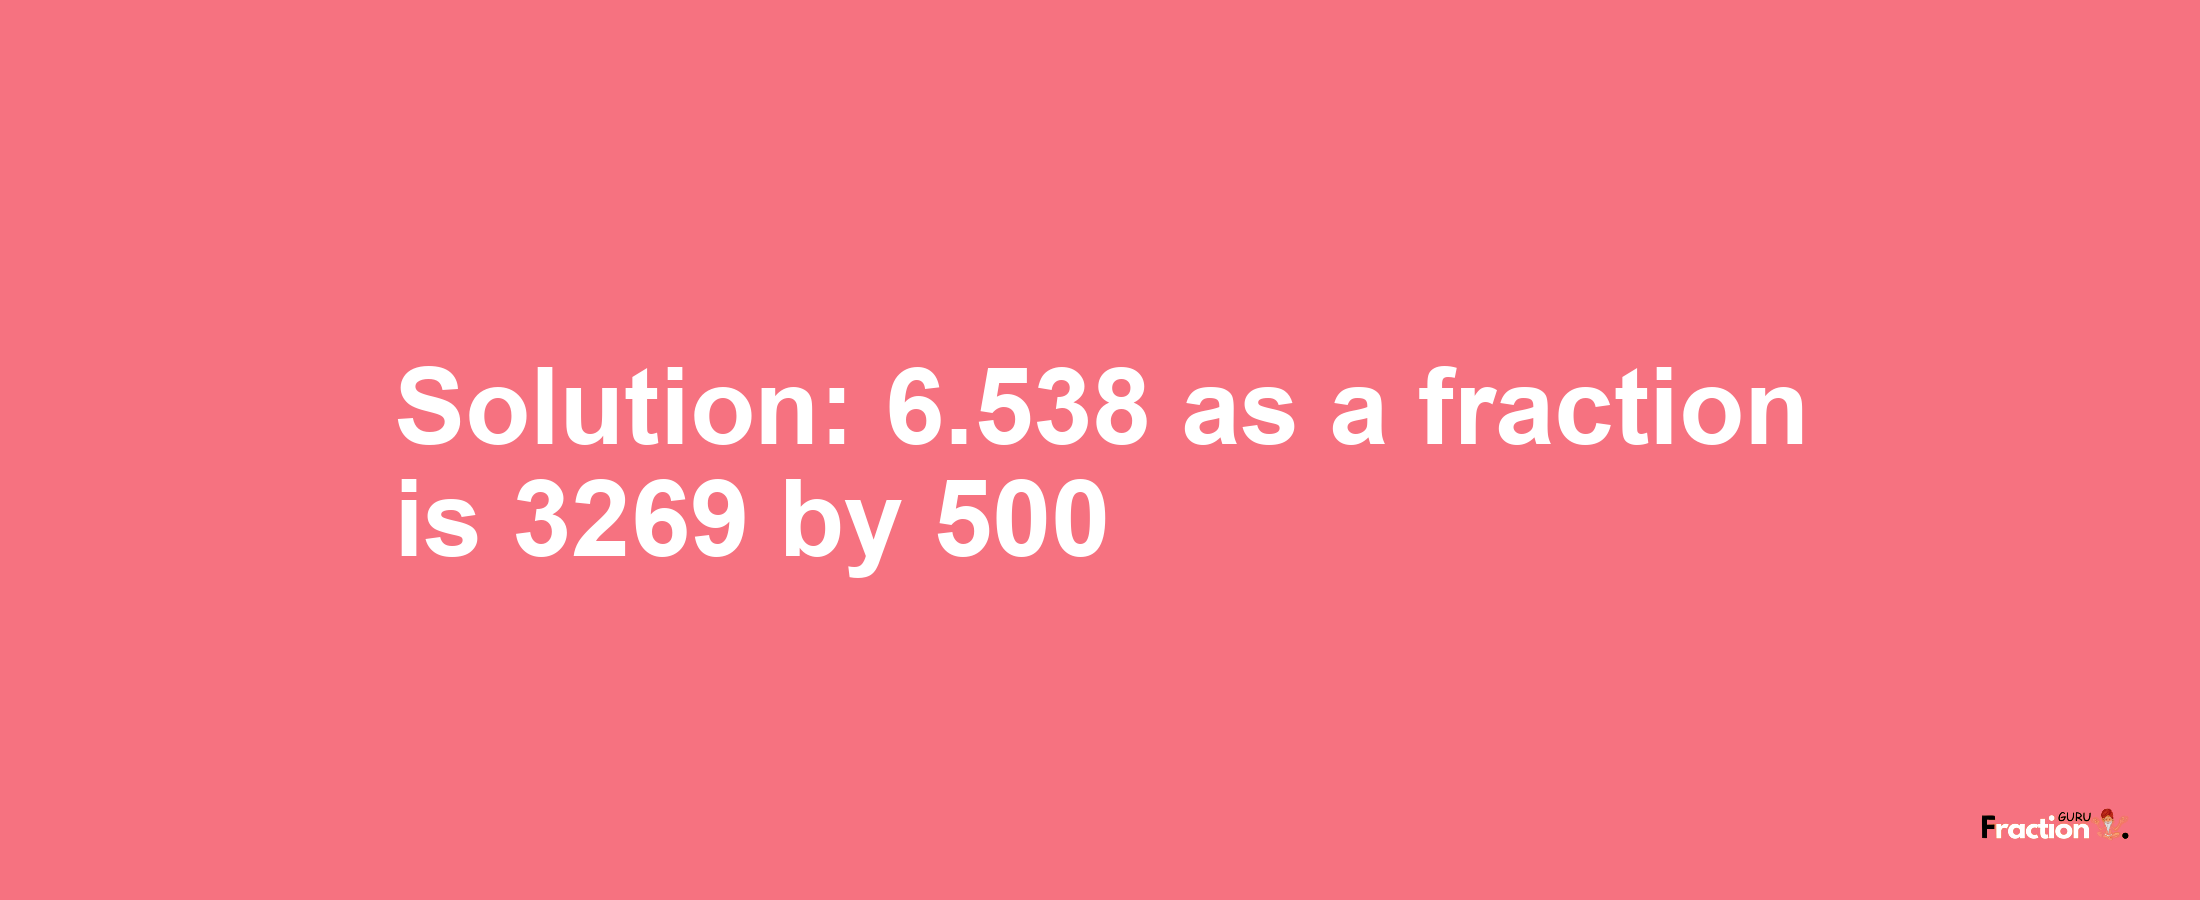 Solution:6.538 as a fraction is 3269/500